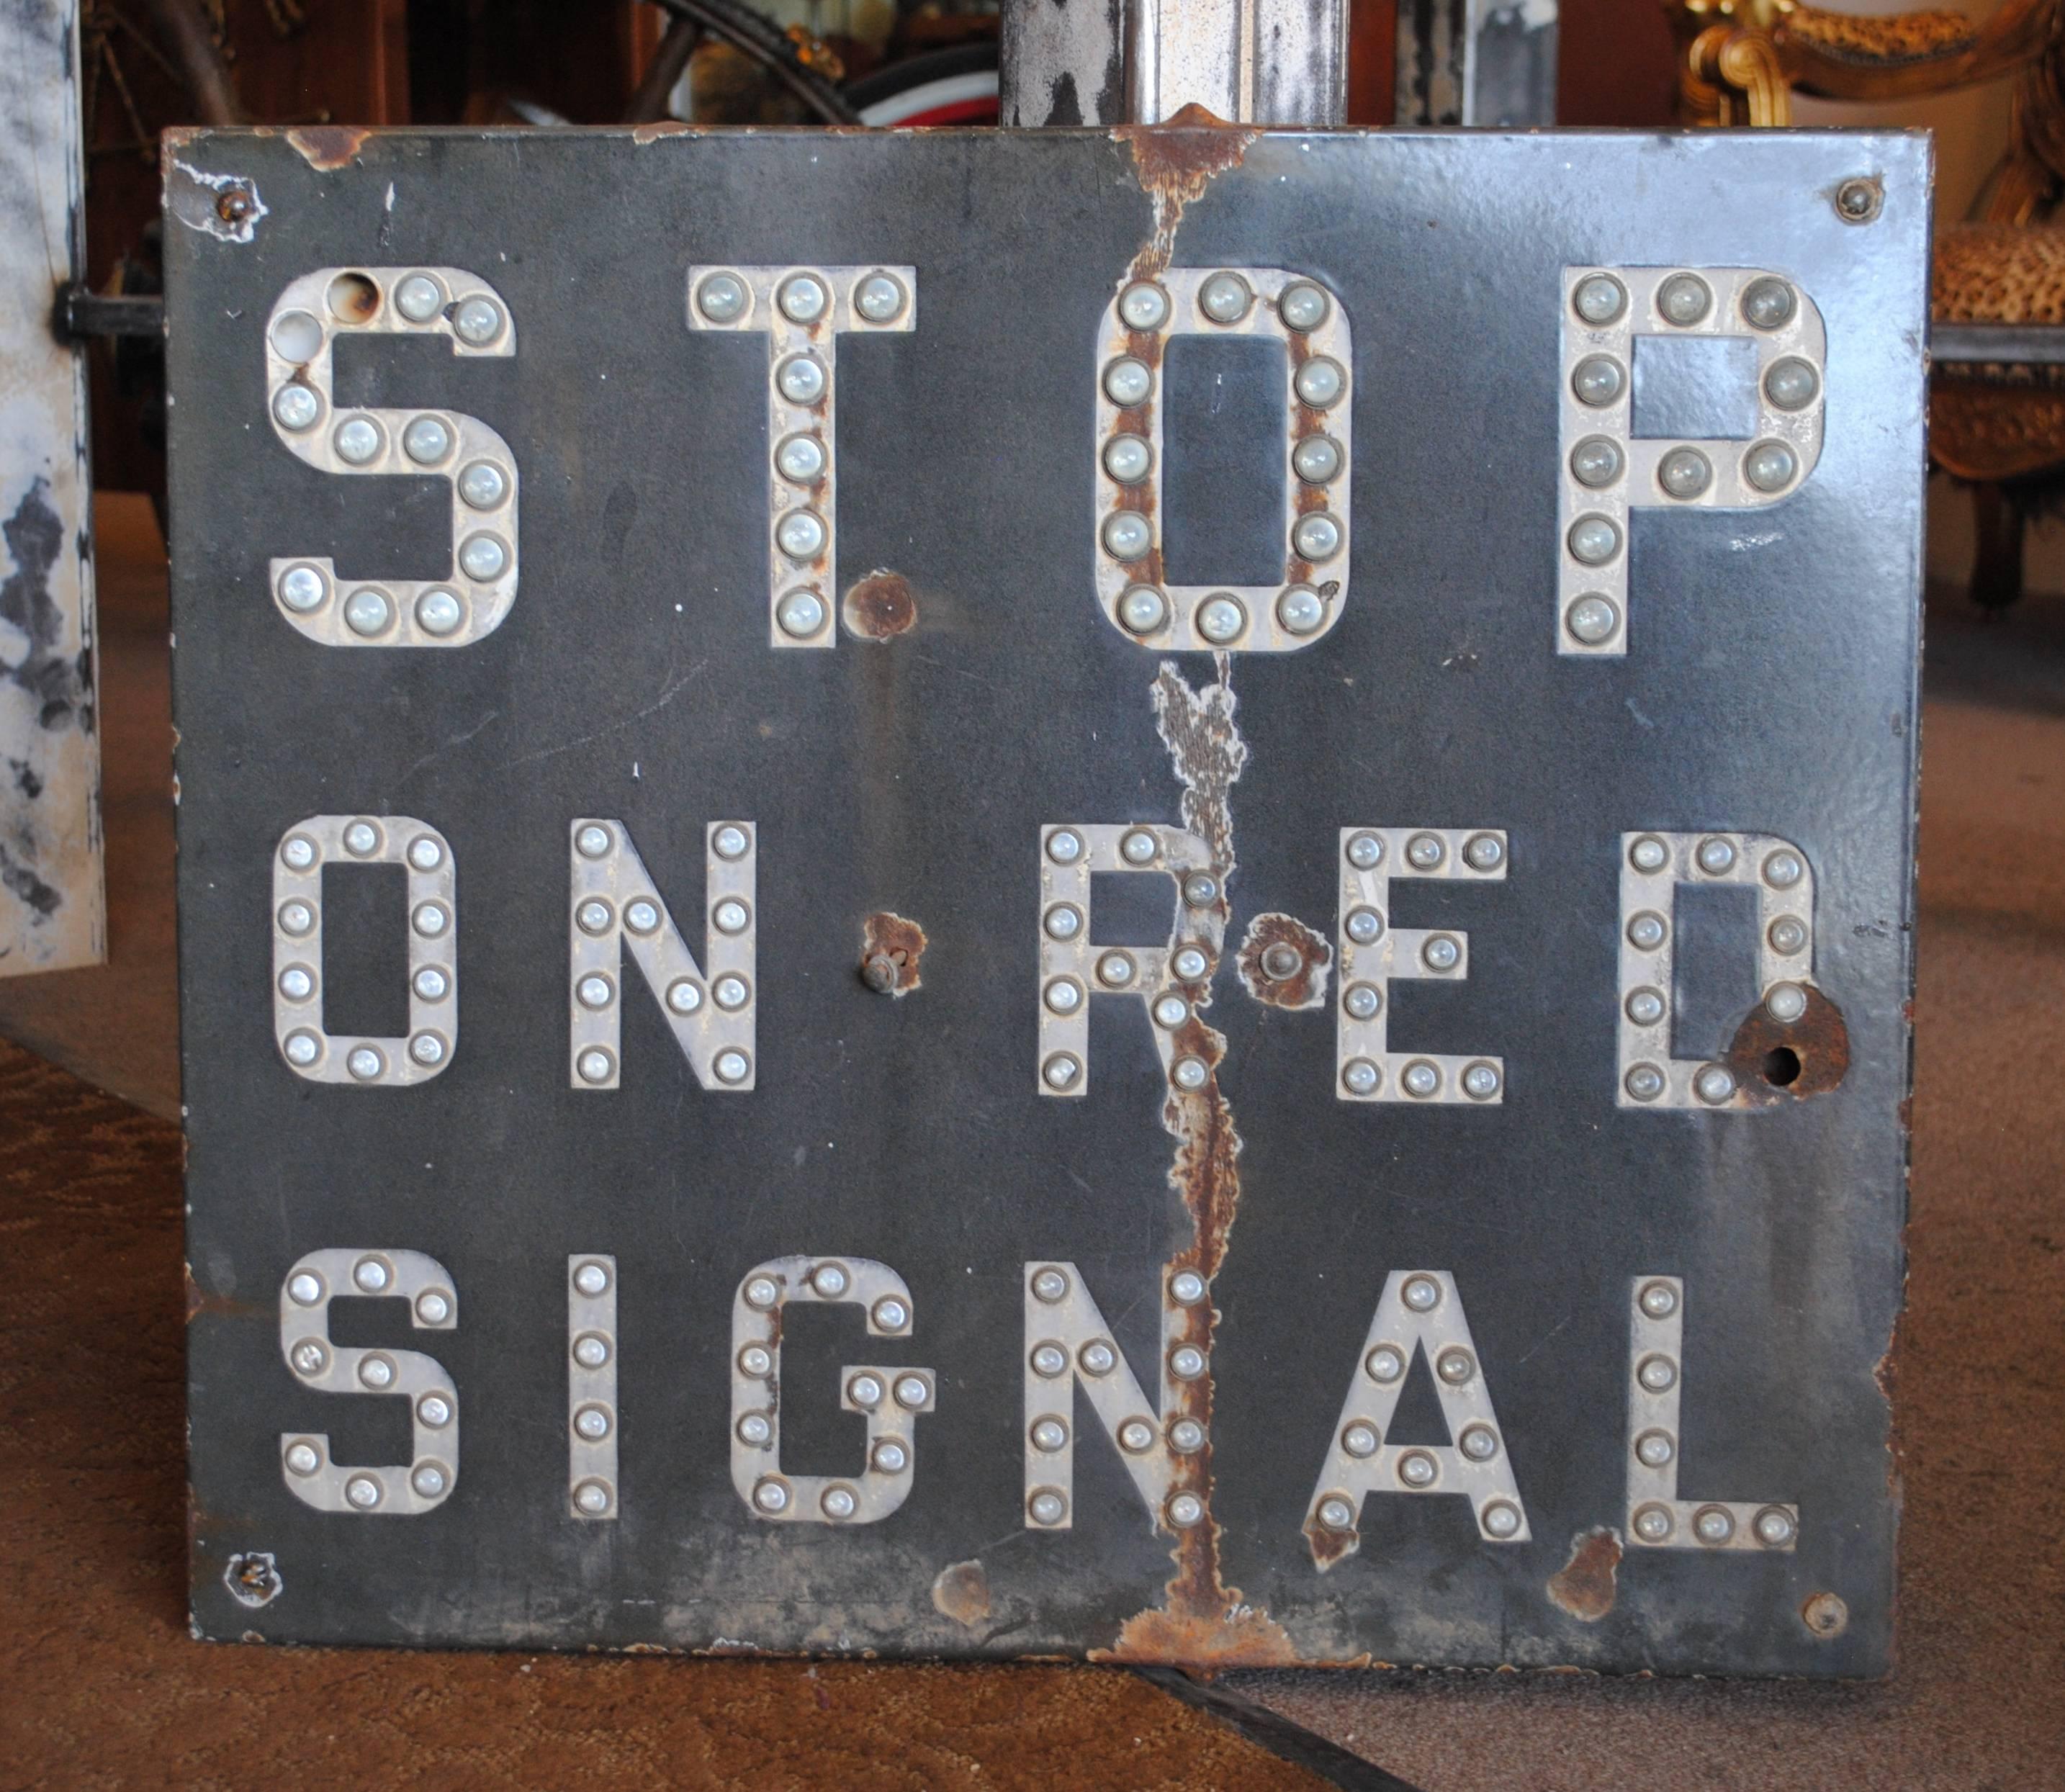 Vintage railroad STOP ON RED SIGNAL sign with glass marble reflectors. The sign has great patina and old worn paint. It displays very well.